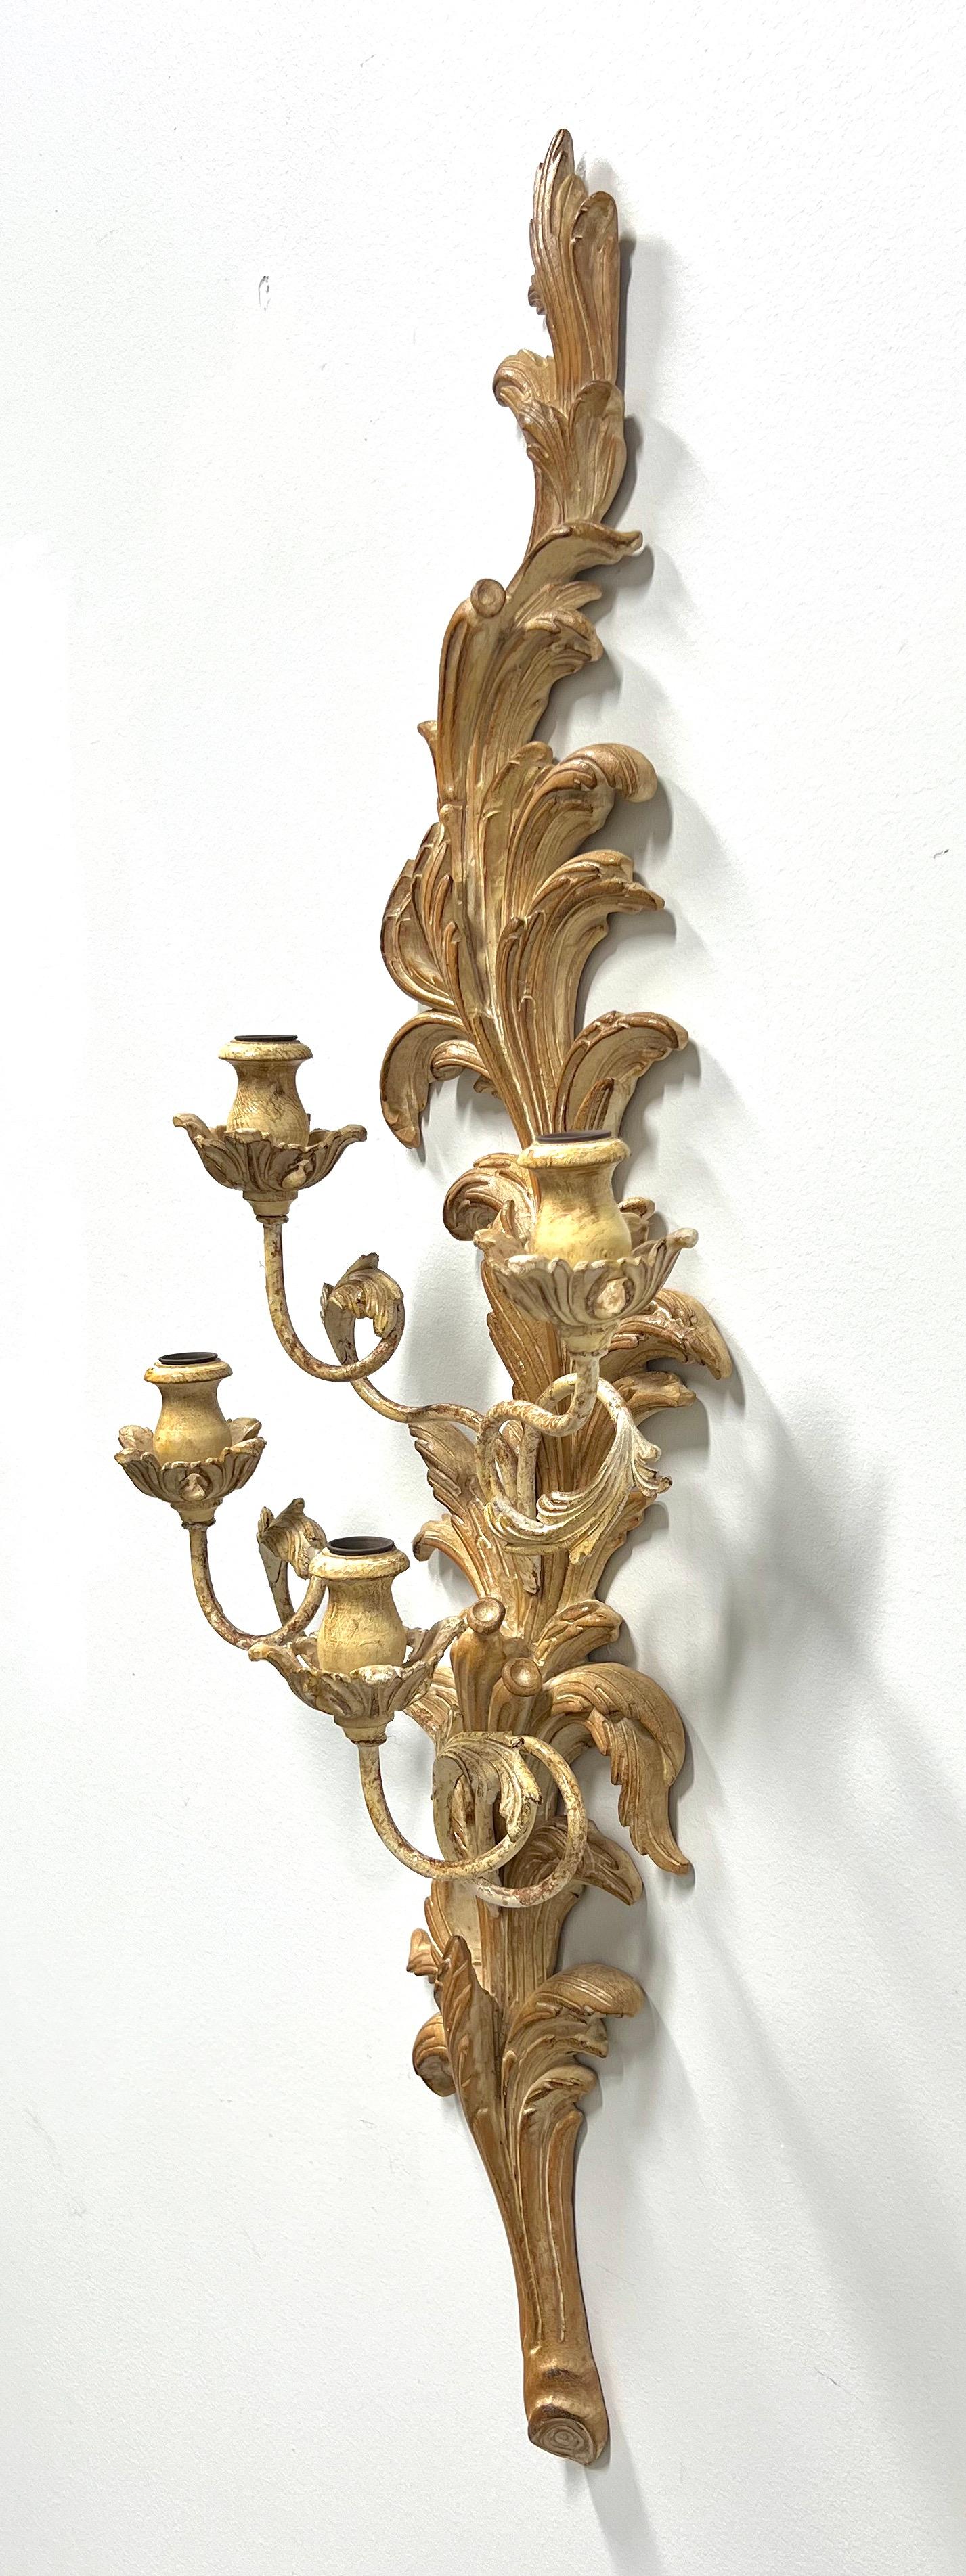 Rococo MARBRO LAMP 1980's Large Whitewashed Wood Foliate Carved Candle Sconce For Sale